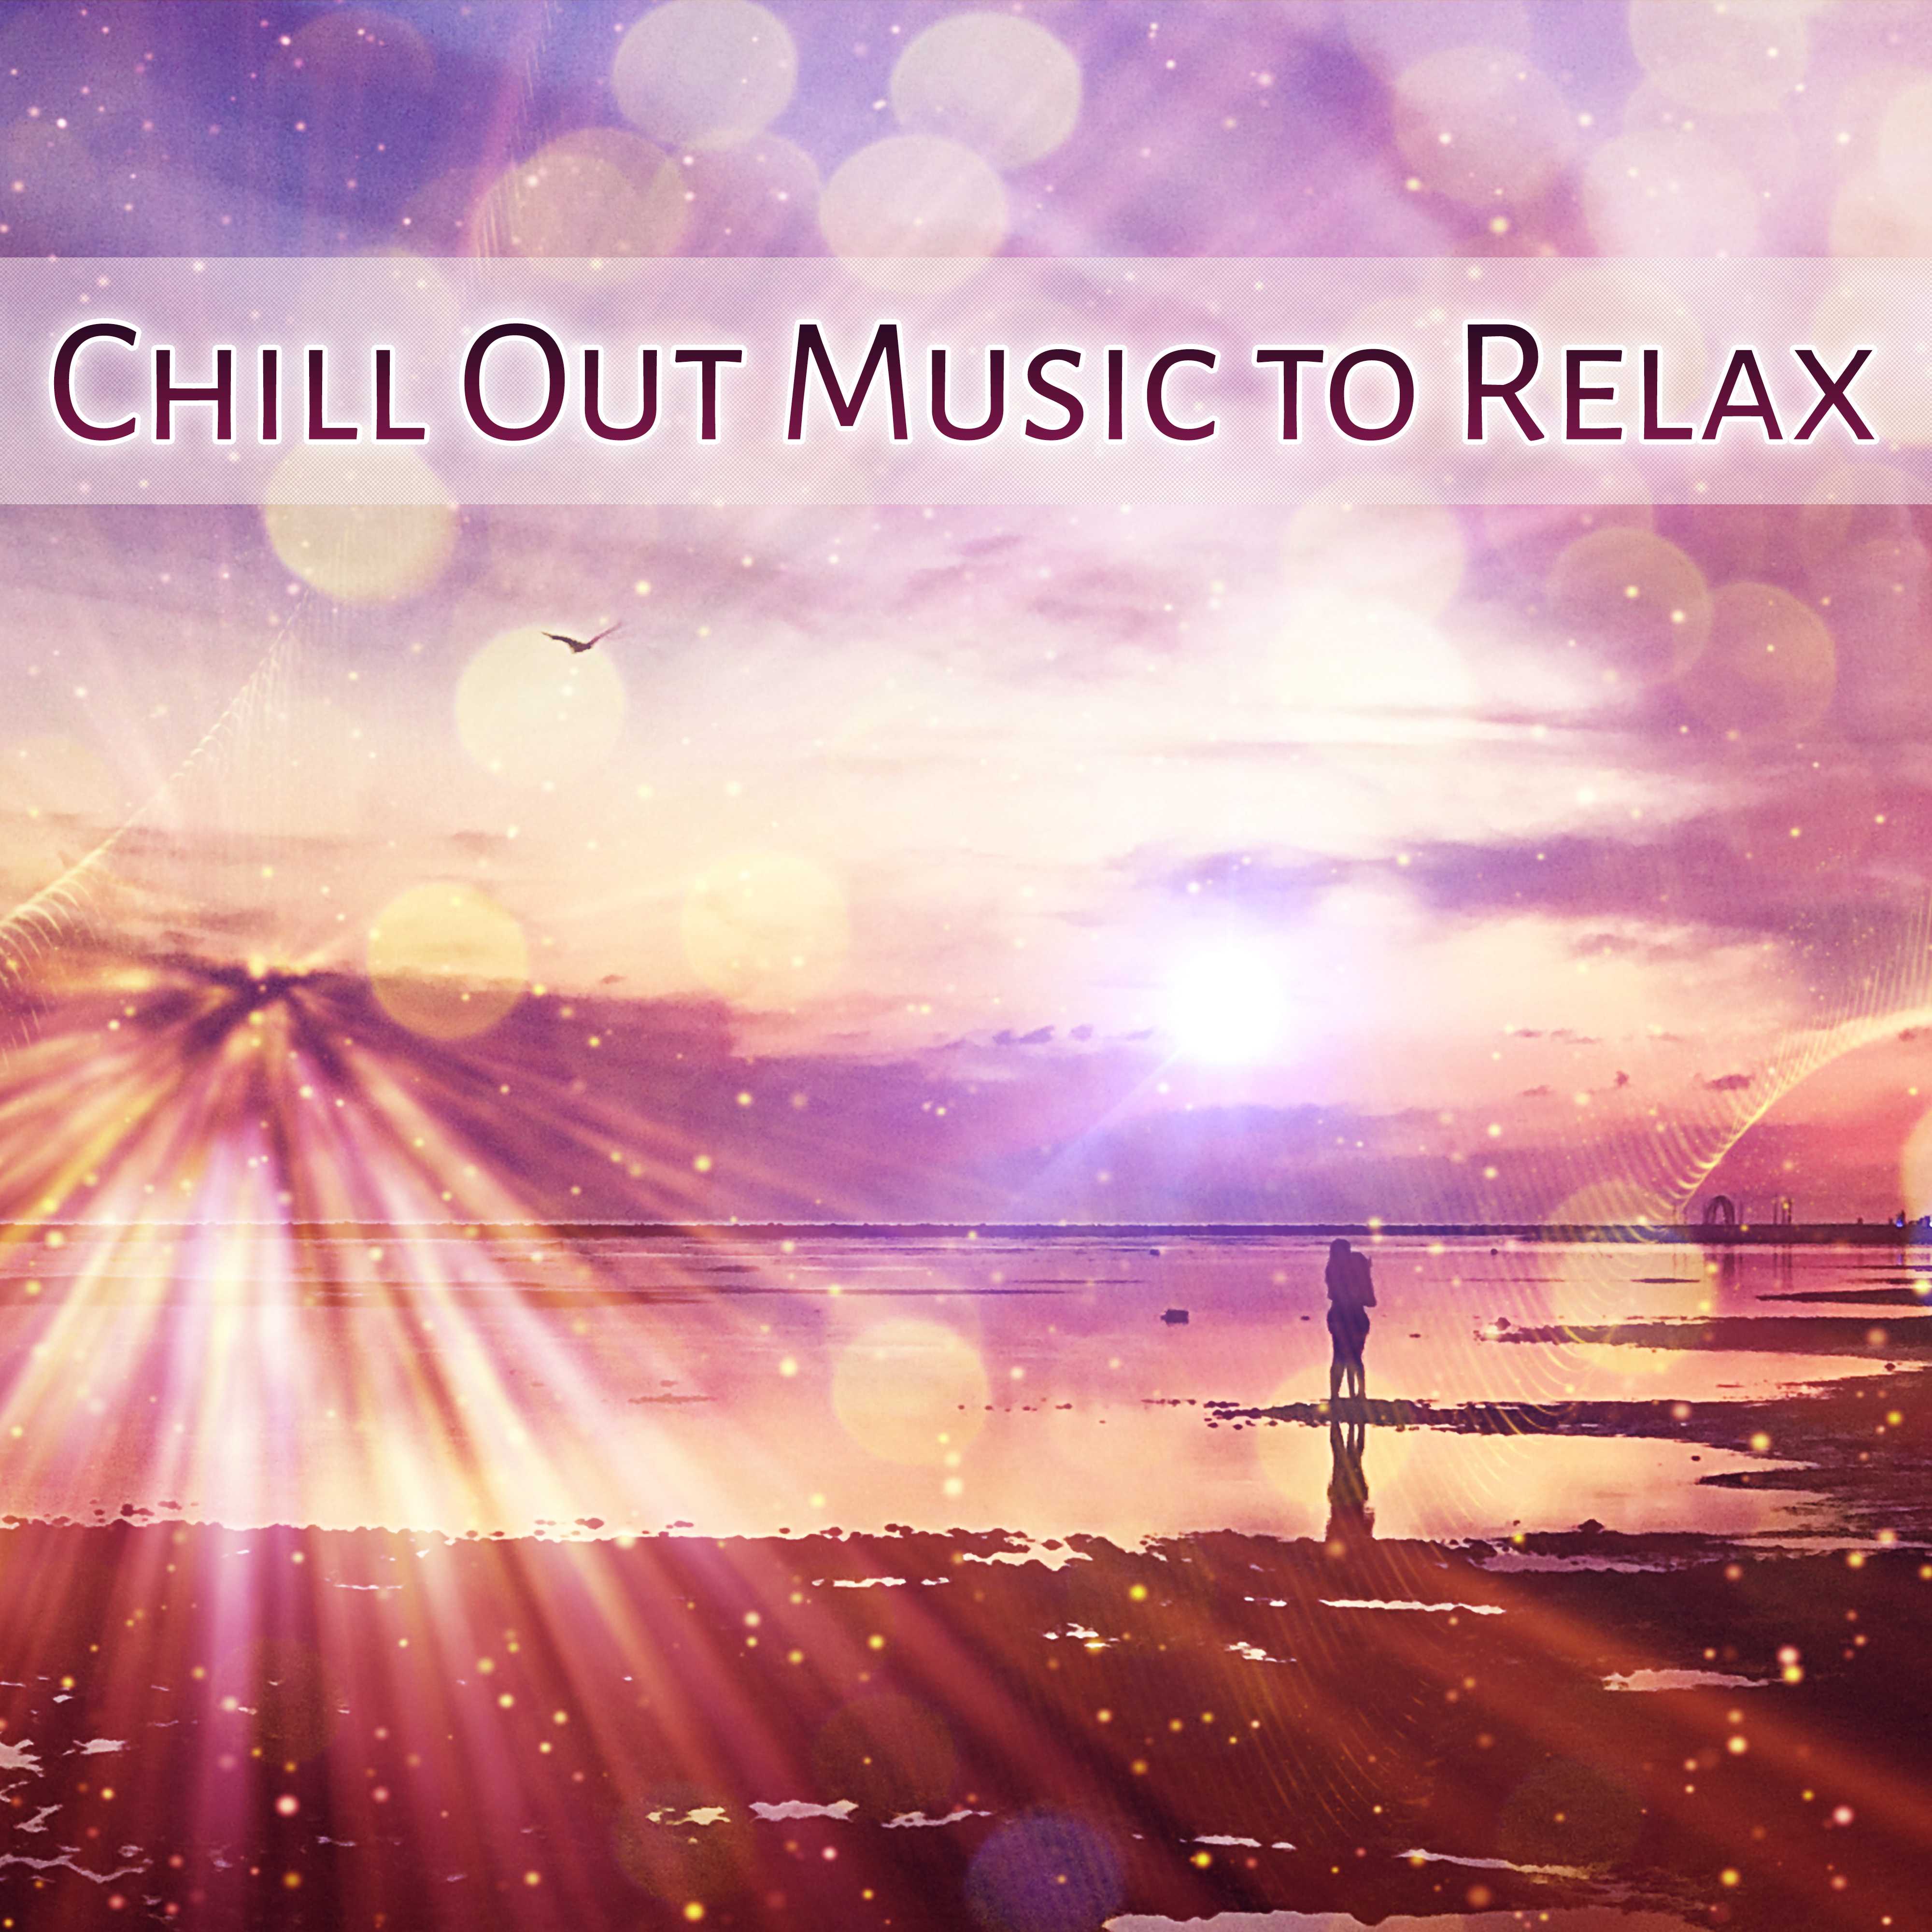 Chill Out Music to Relax – Easy Listening, Beach Relaxation, Rest with Calm Music, Soft Sounds